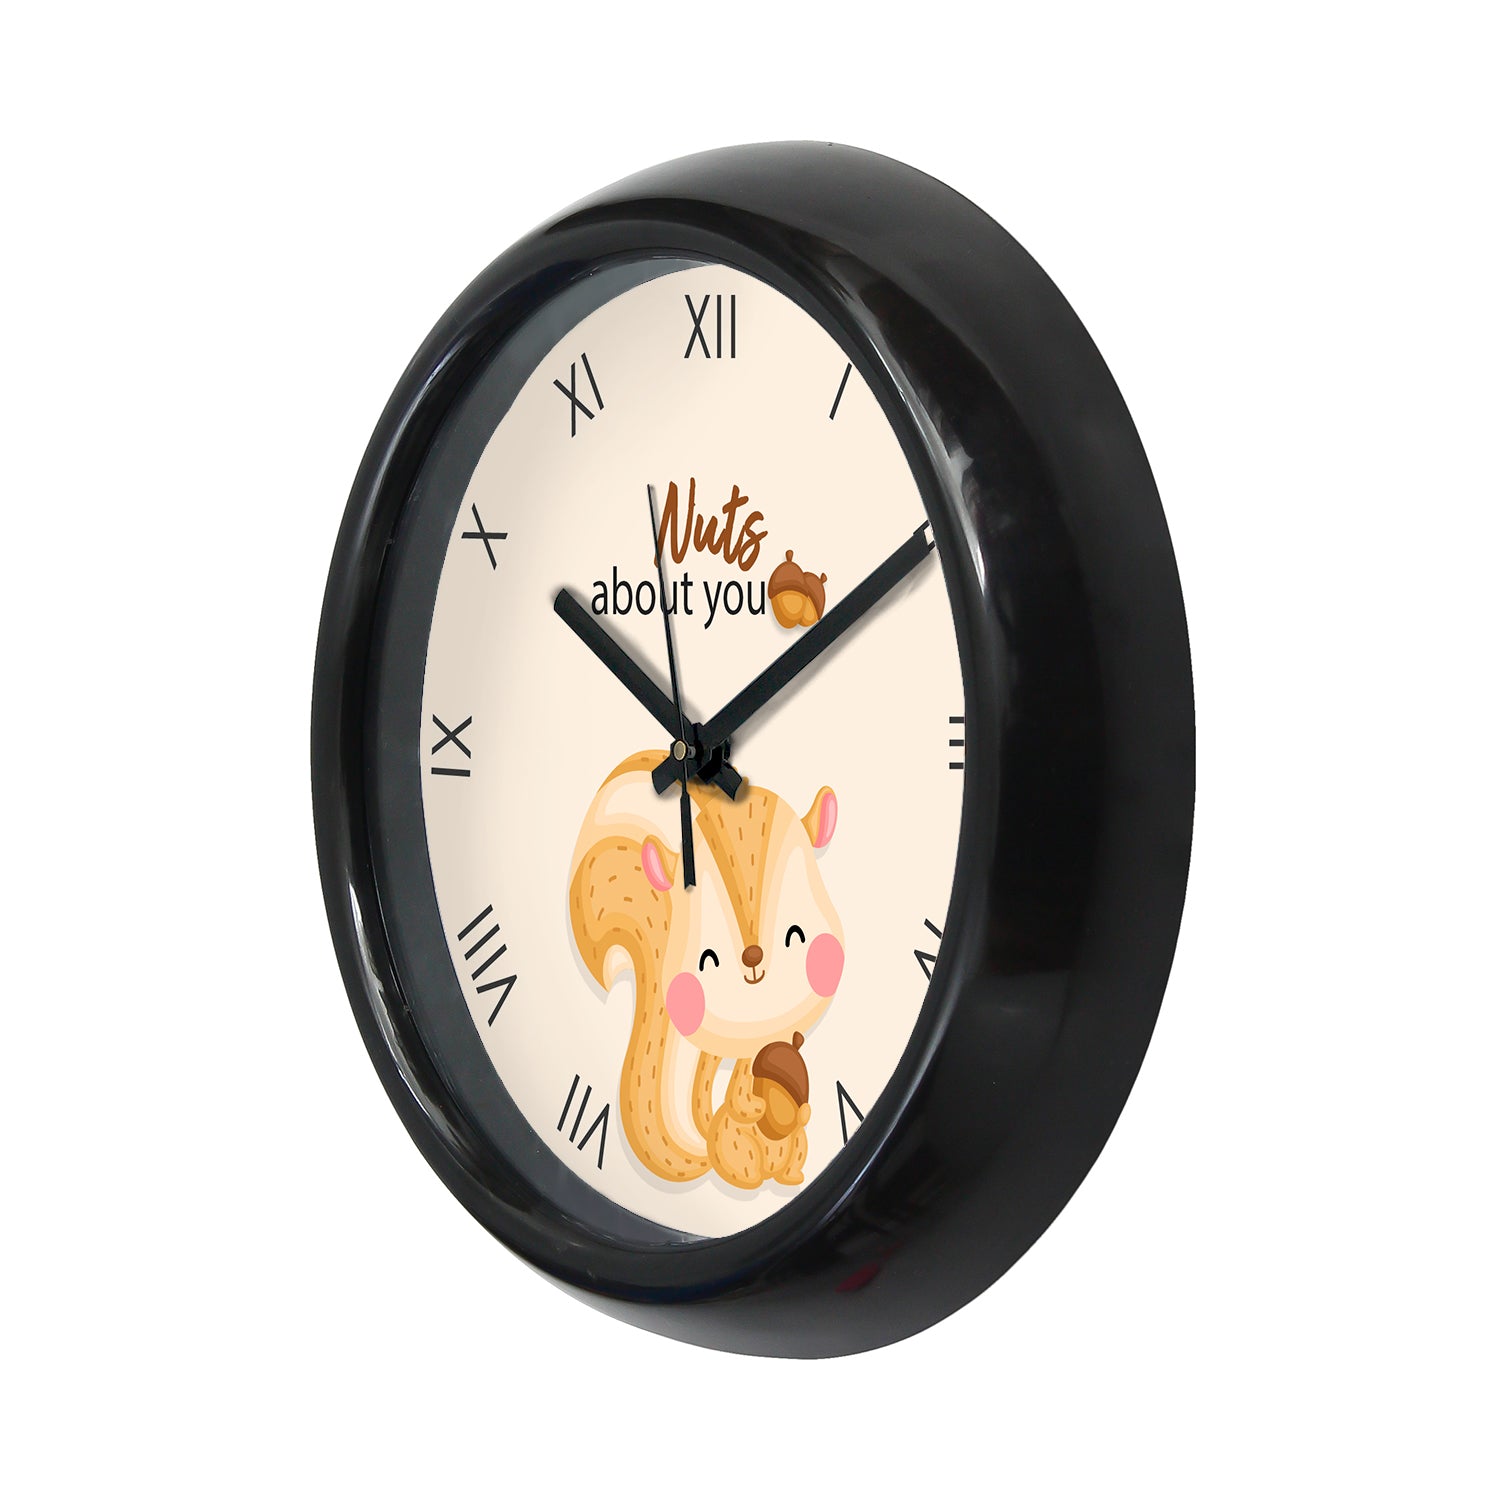 "Nuts About You" Designer Round Analog Black Wall Clock 4